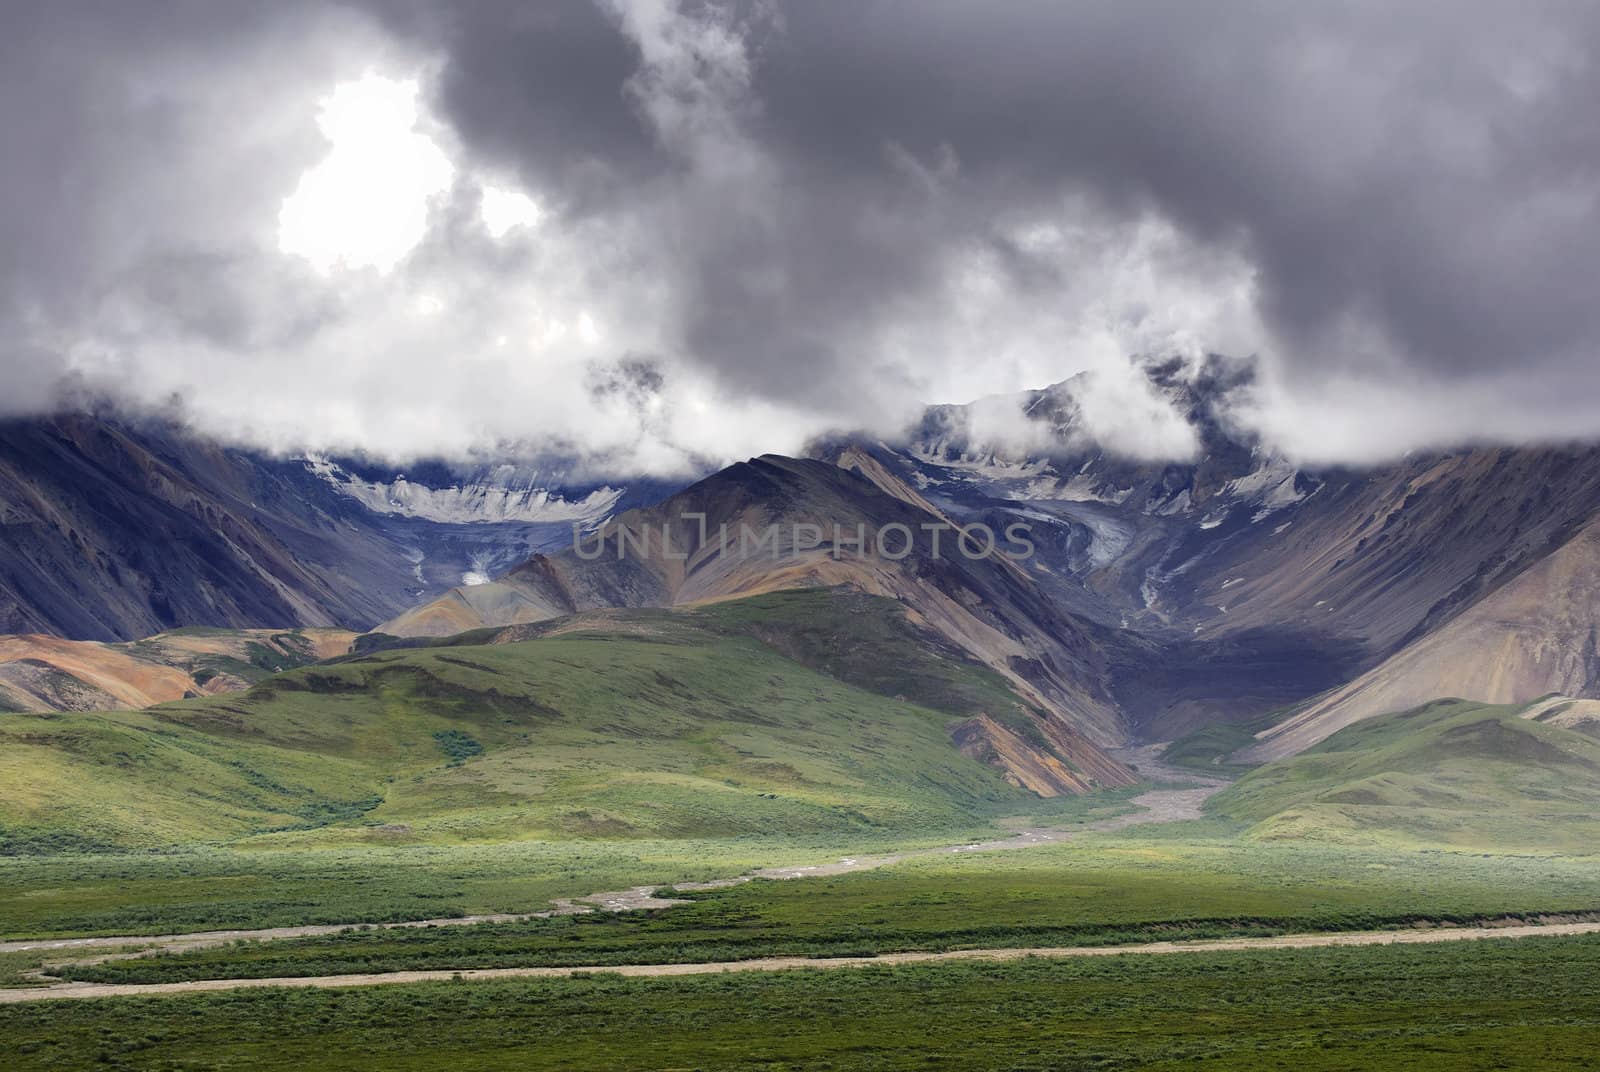 Wide wild scenery with two glaciers at Denali - Alaska. by Claudine